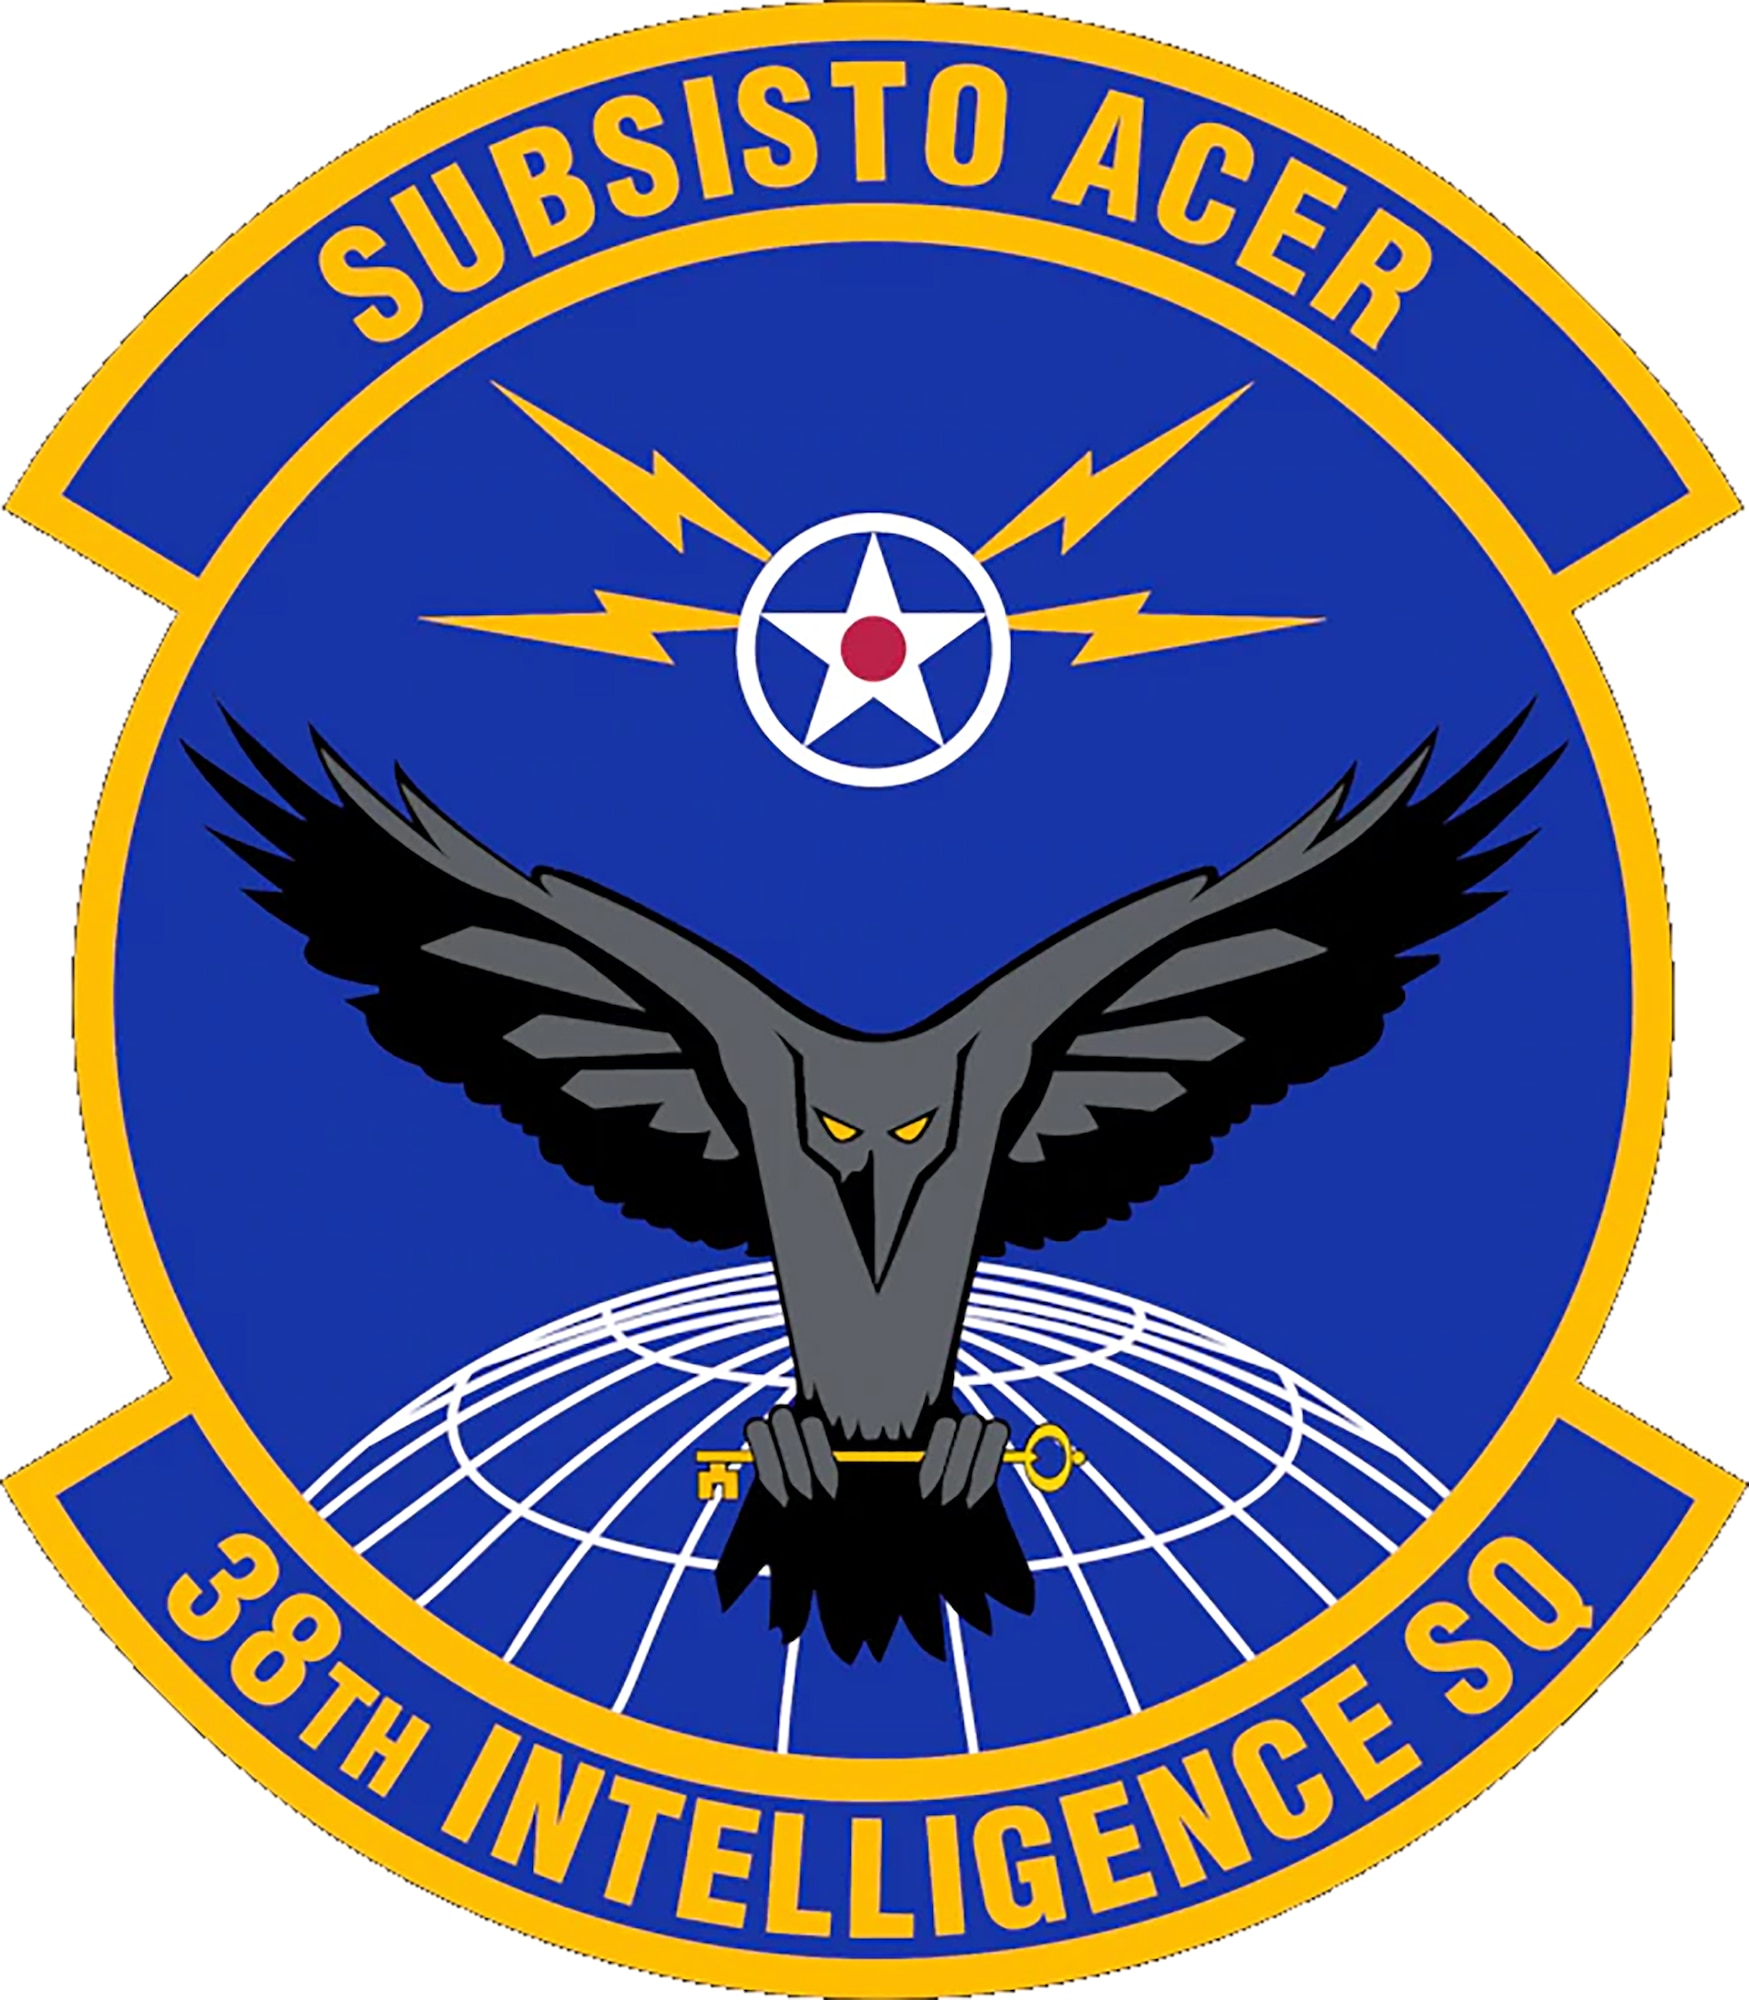 As 2021 brings on the start of a new year, Airmen from the 38th Intelligence Squadron (IS) are planning for the future. With the many challenges this last year has provided, unique thinking and problem solving have been absolutely necessary.